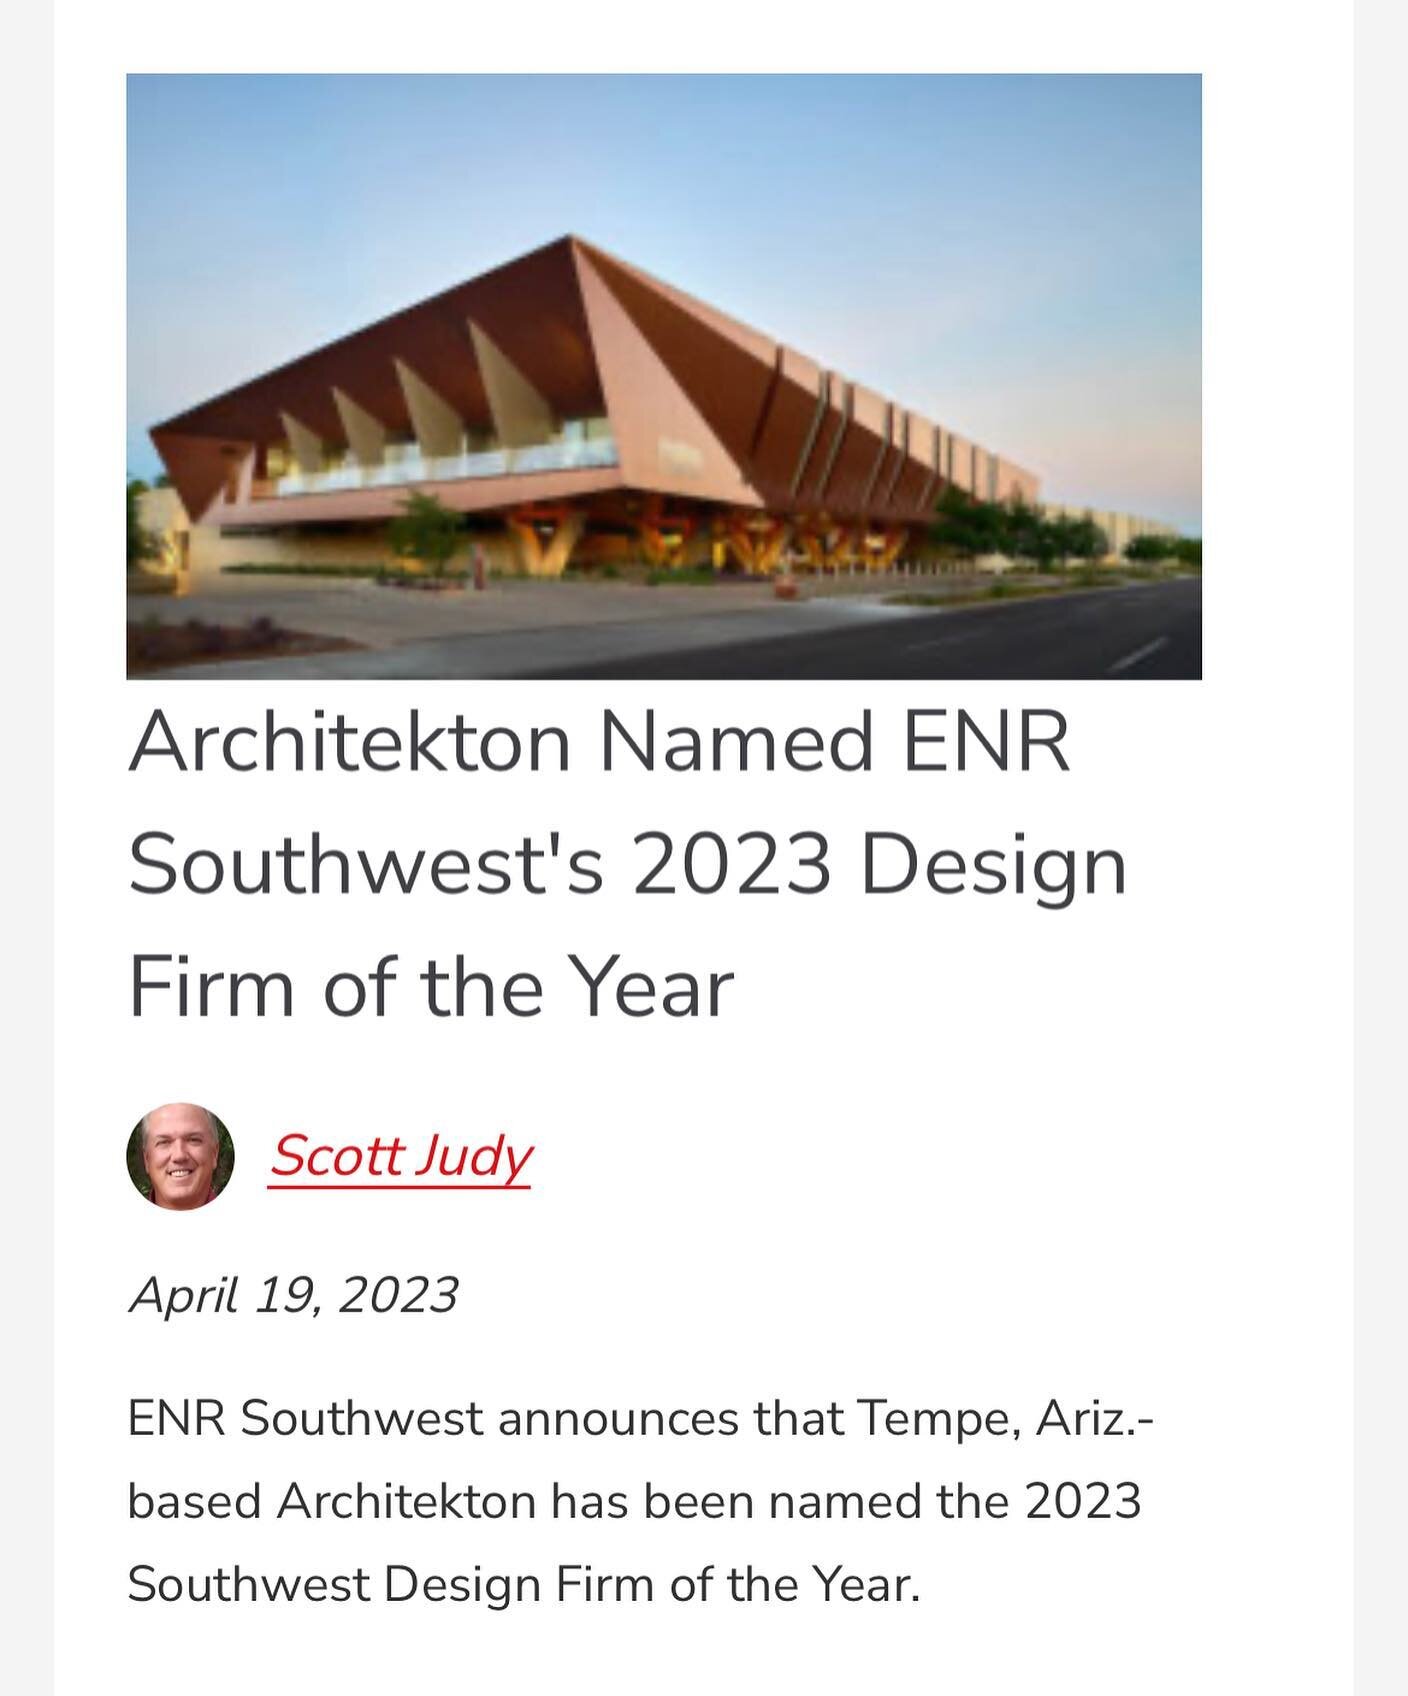 Our entire office is humbled and honored to be recognized as this year&rsquo;s ENR Southwest&rsquo;s Design Firm of the Year. Thank you to every client, builder, and design partner who's passion for design contributed to this acknowledgment. We celeb